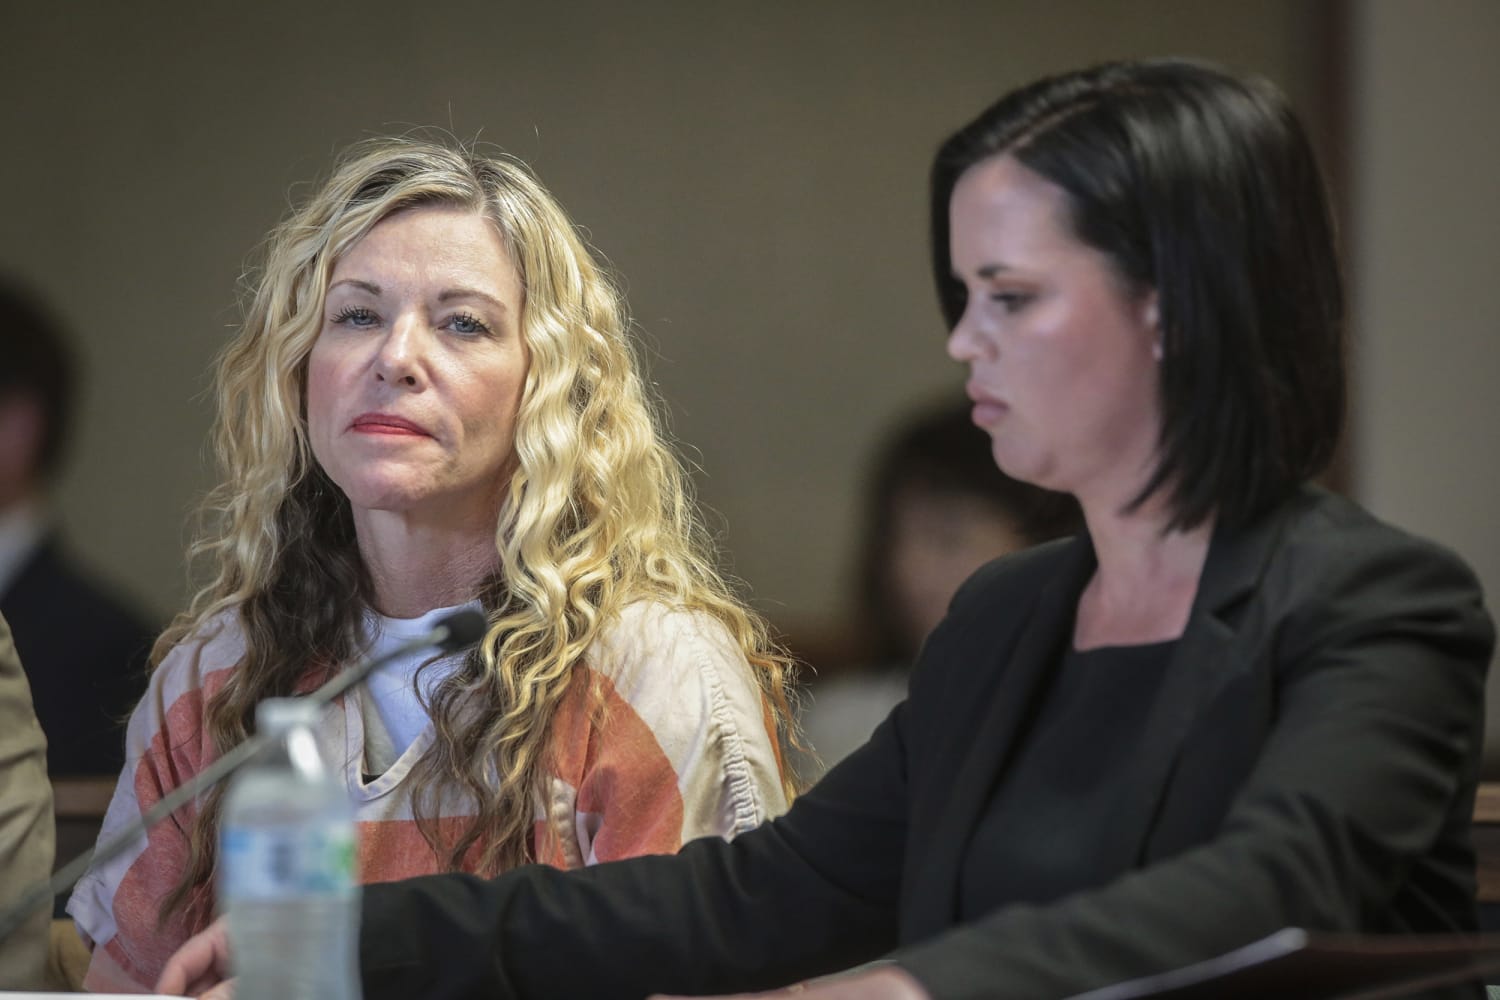 Lori Vallow, Idaho mother charged with killing her children, pleads not guilty